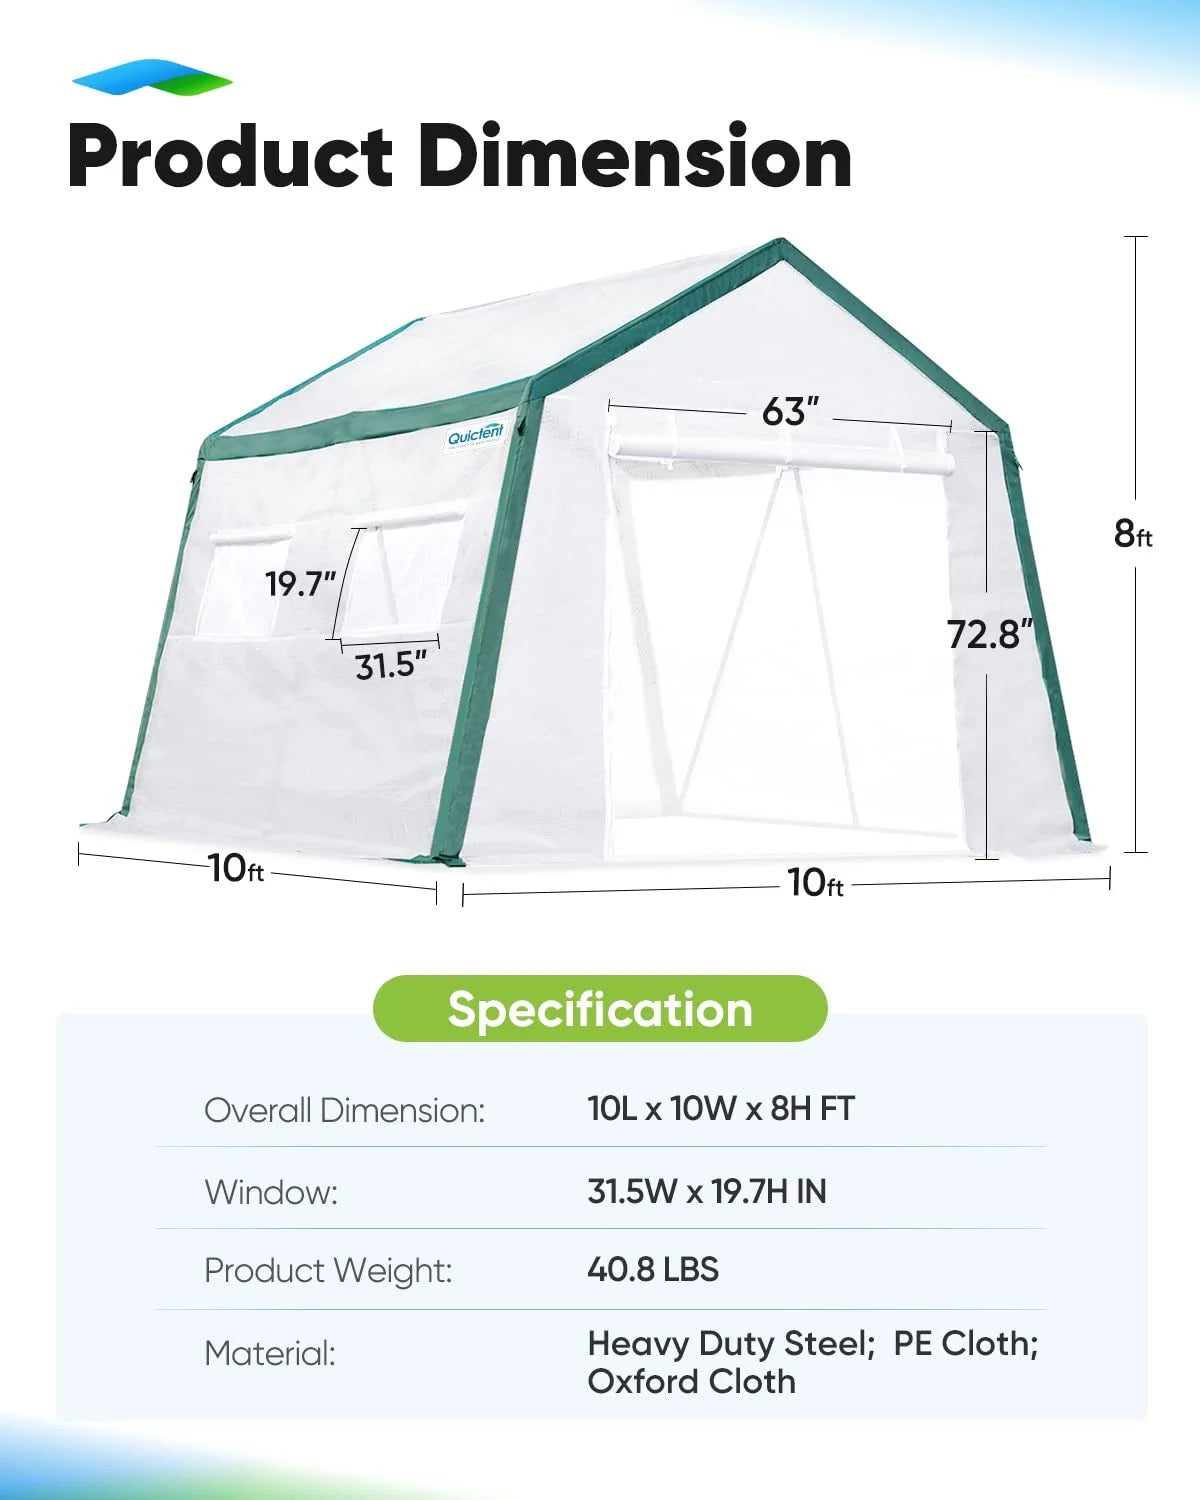 Product dimension 